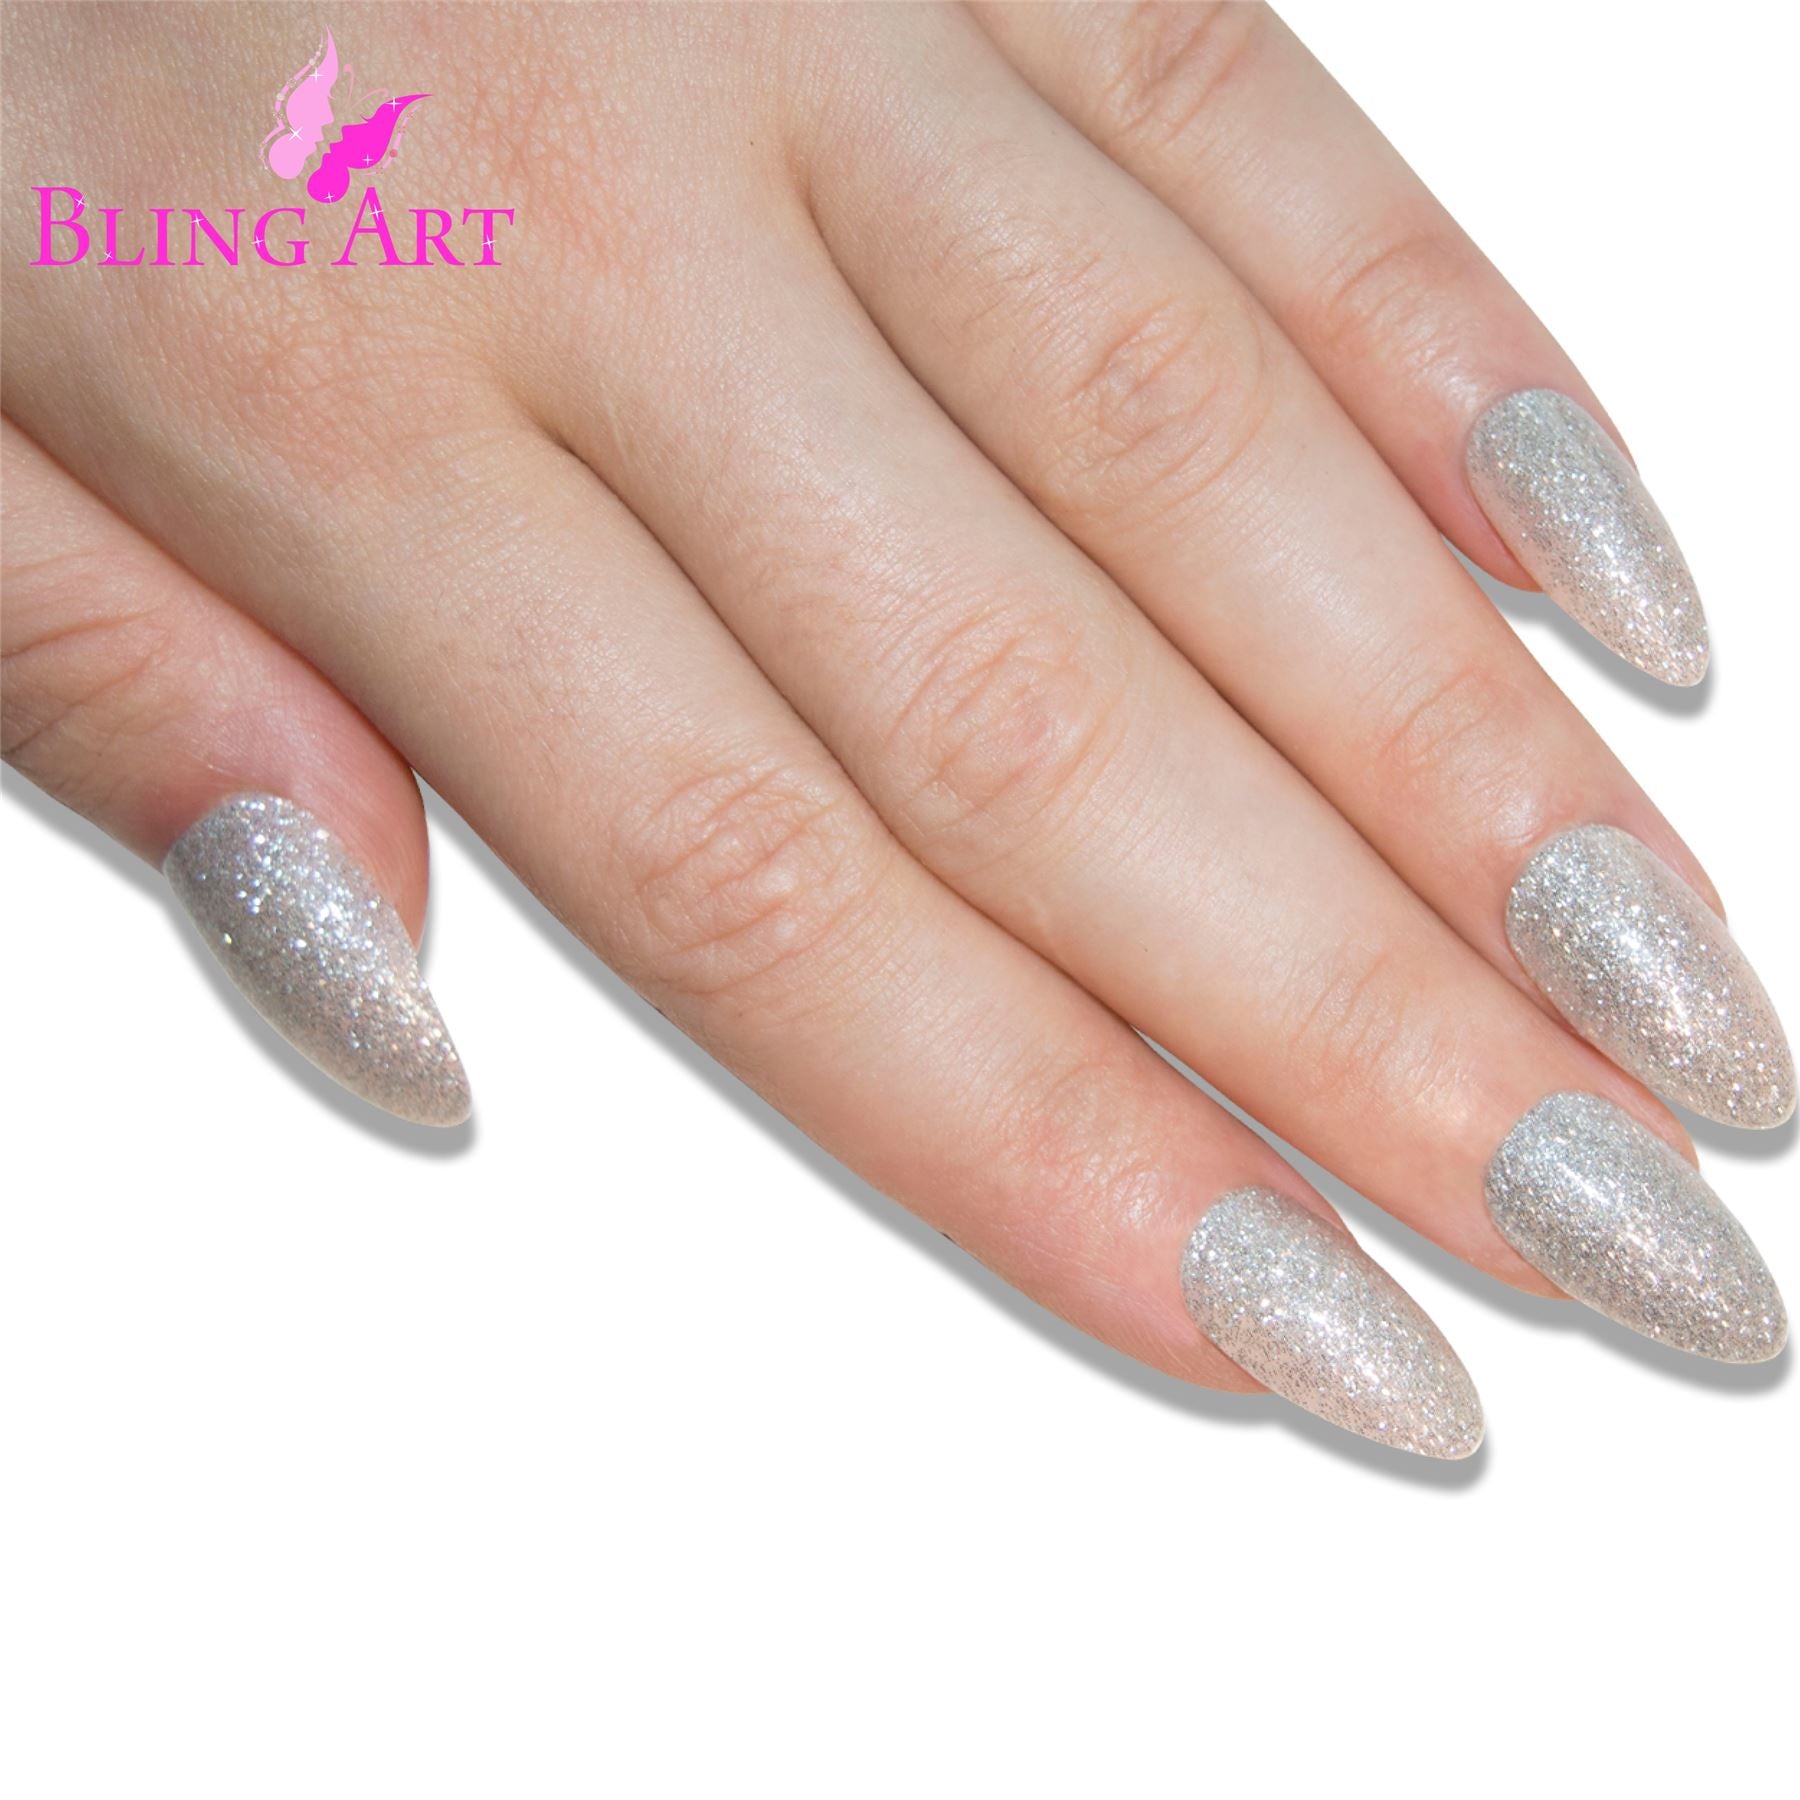 False Nails Bling Art Silver Gel Almond Stiletto Long Fake Acrylic Tips with Glue